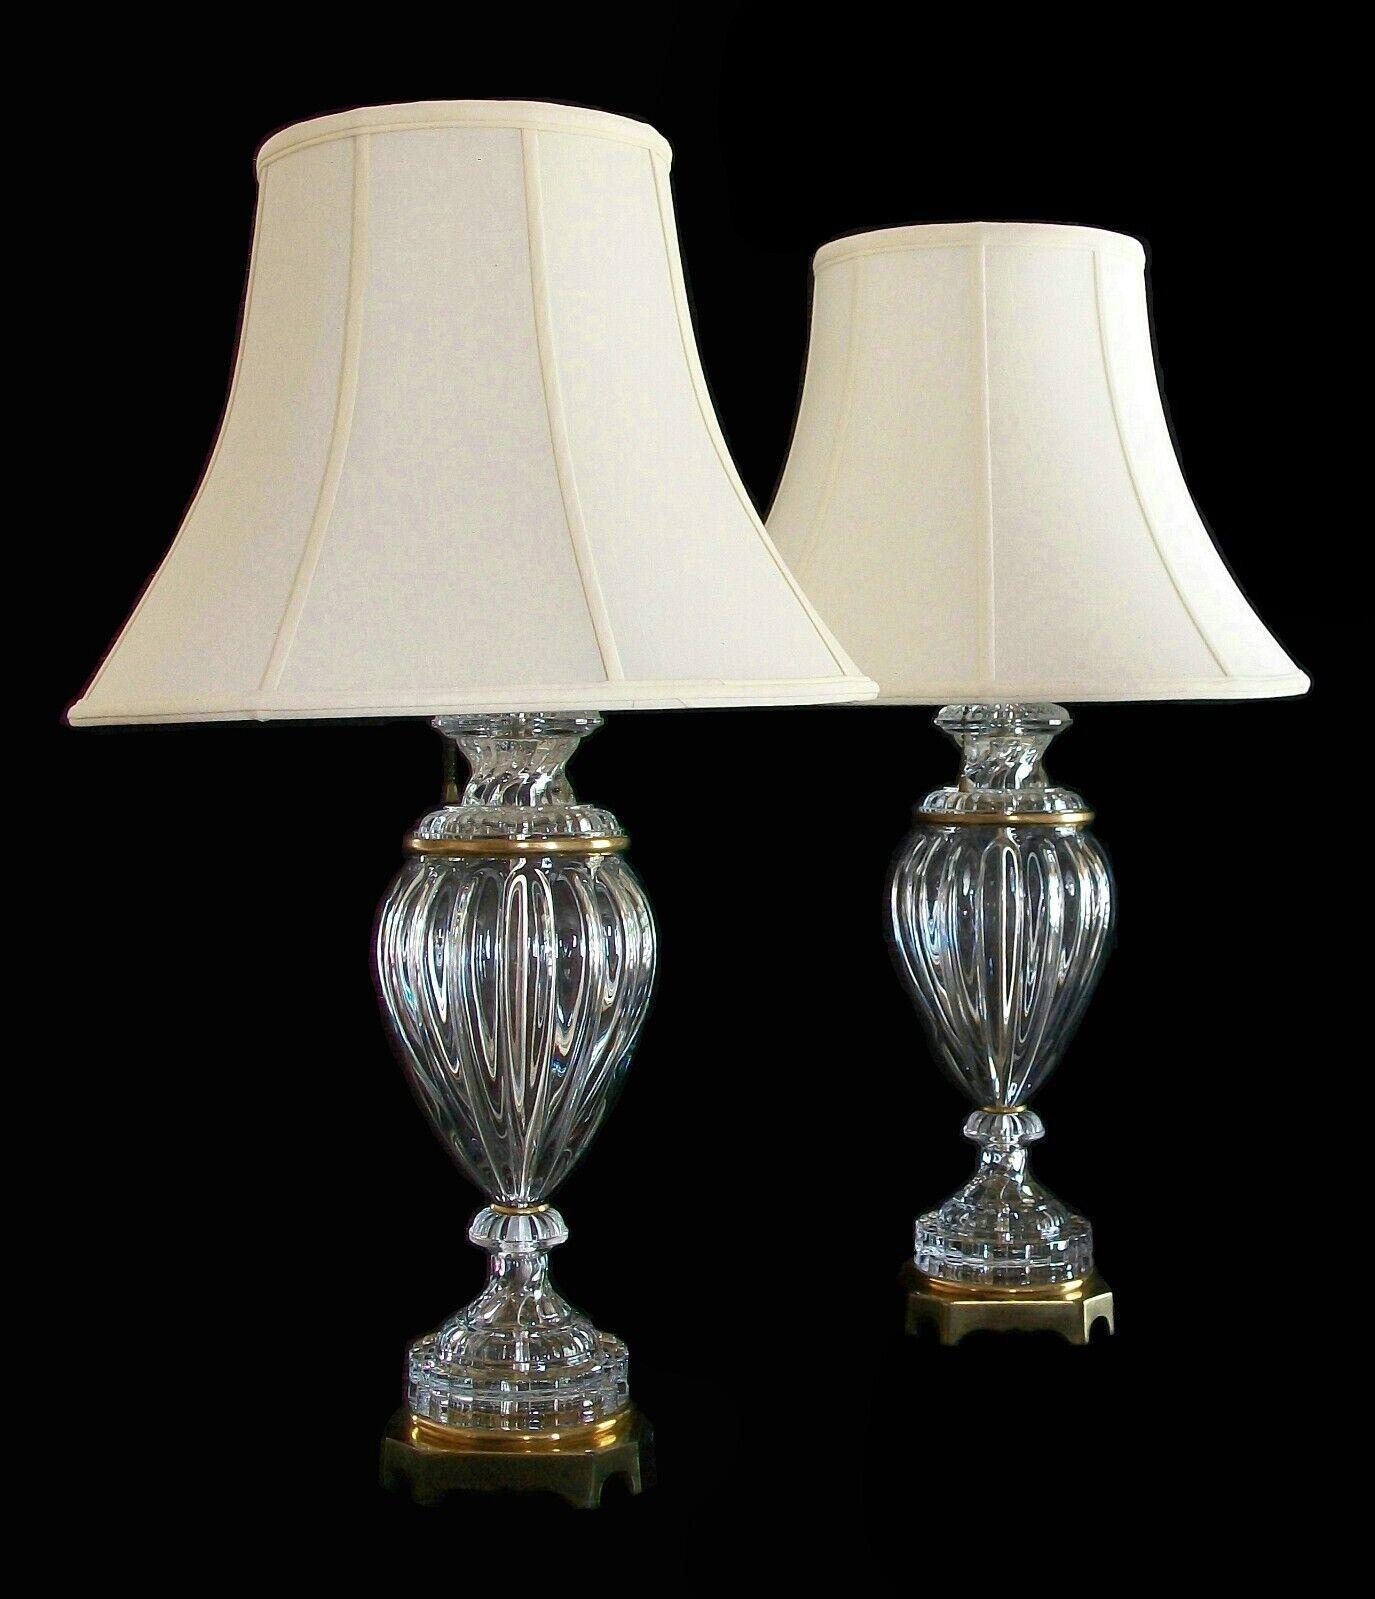 American Paul Hanson, Vintage Pair Baccarat Style Glass & Brass Lamps, U.S., C.1970's For Sale